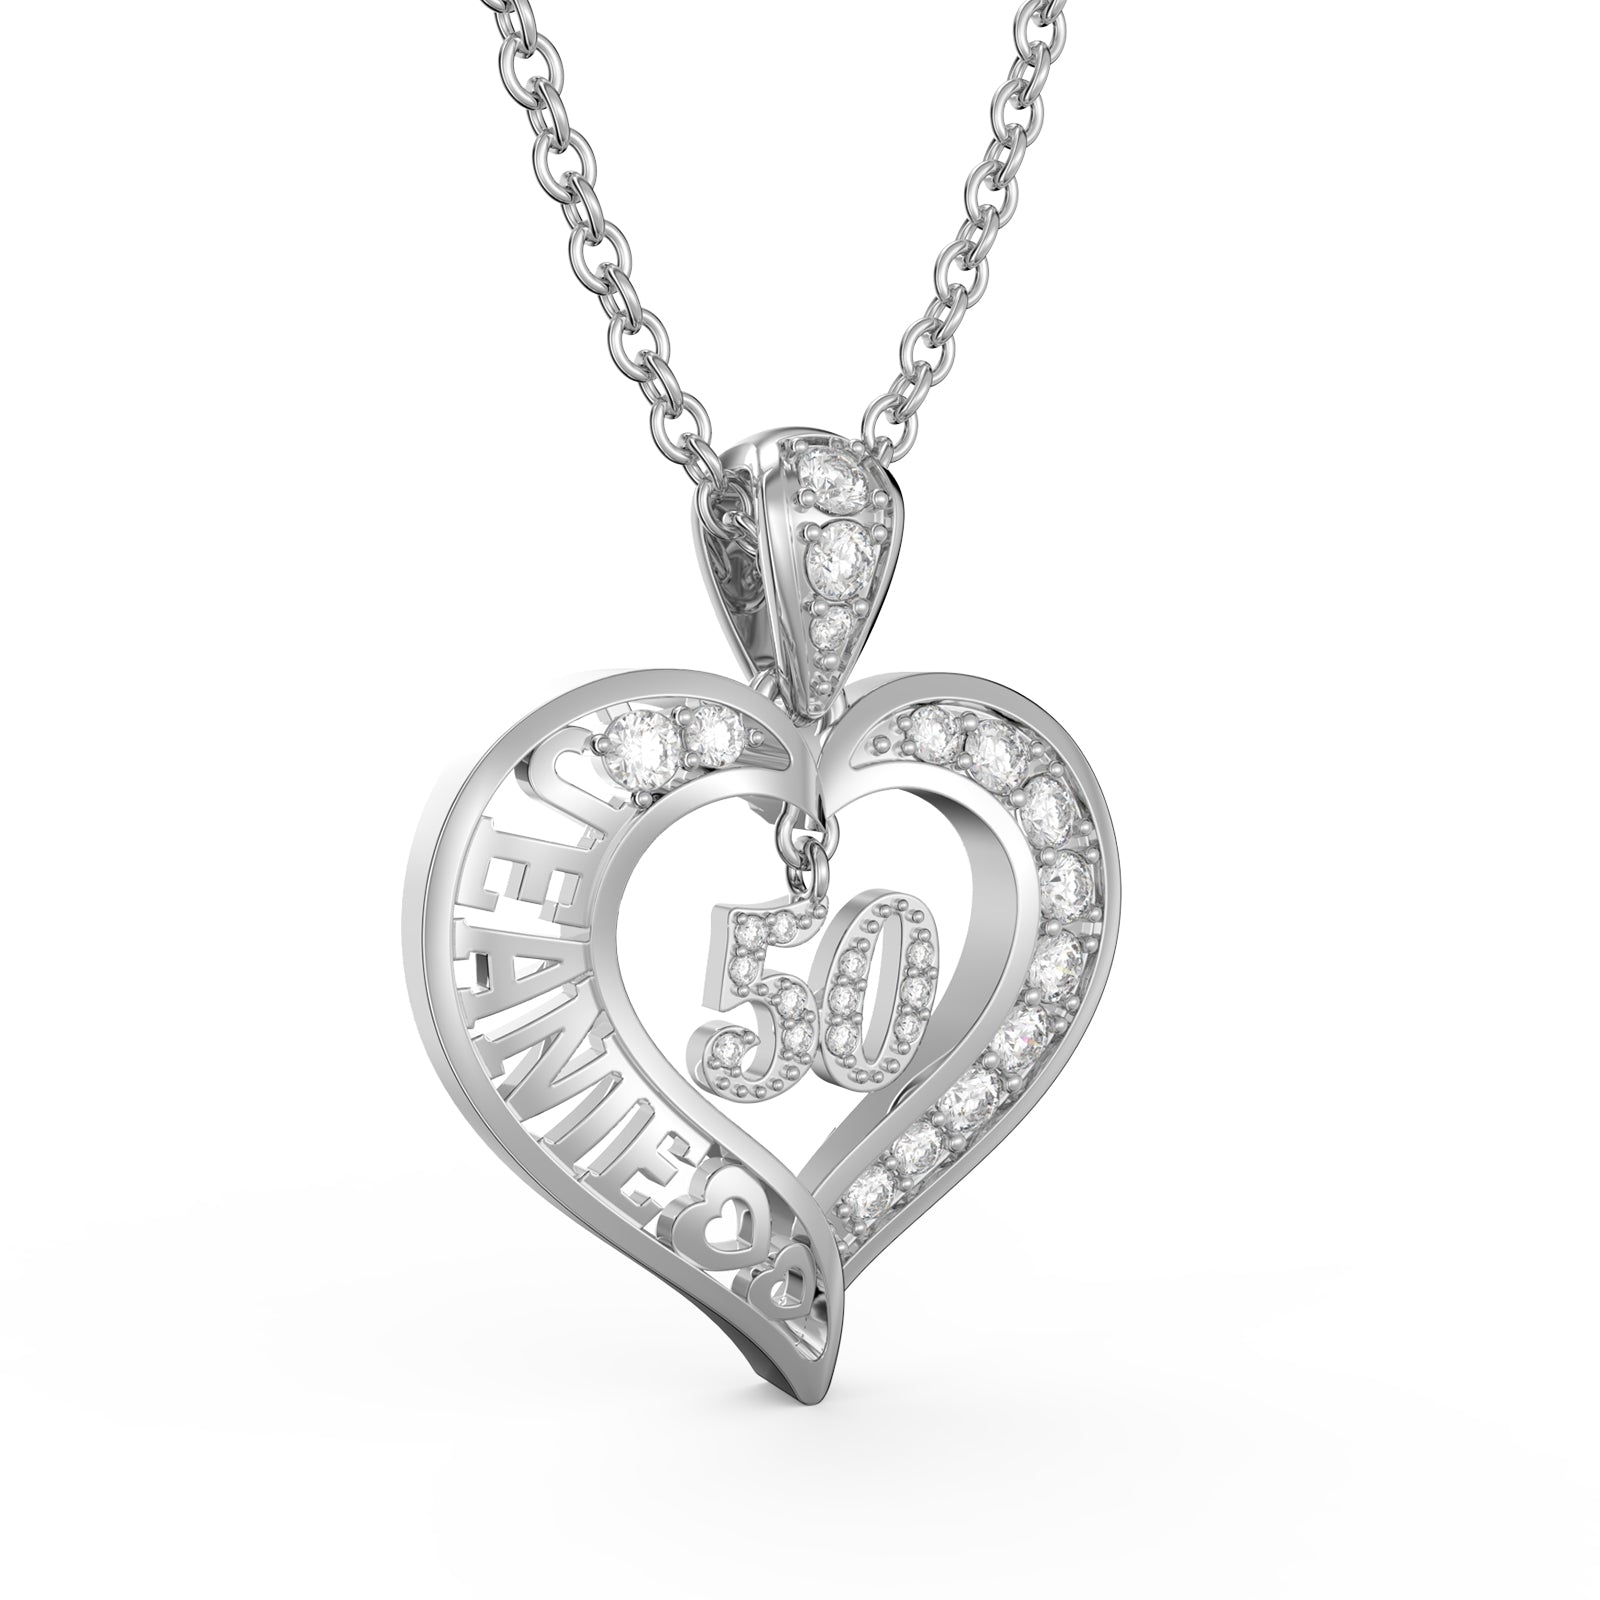 3D Jewelry Heart Necklace